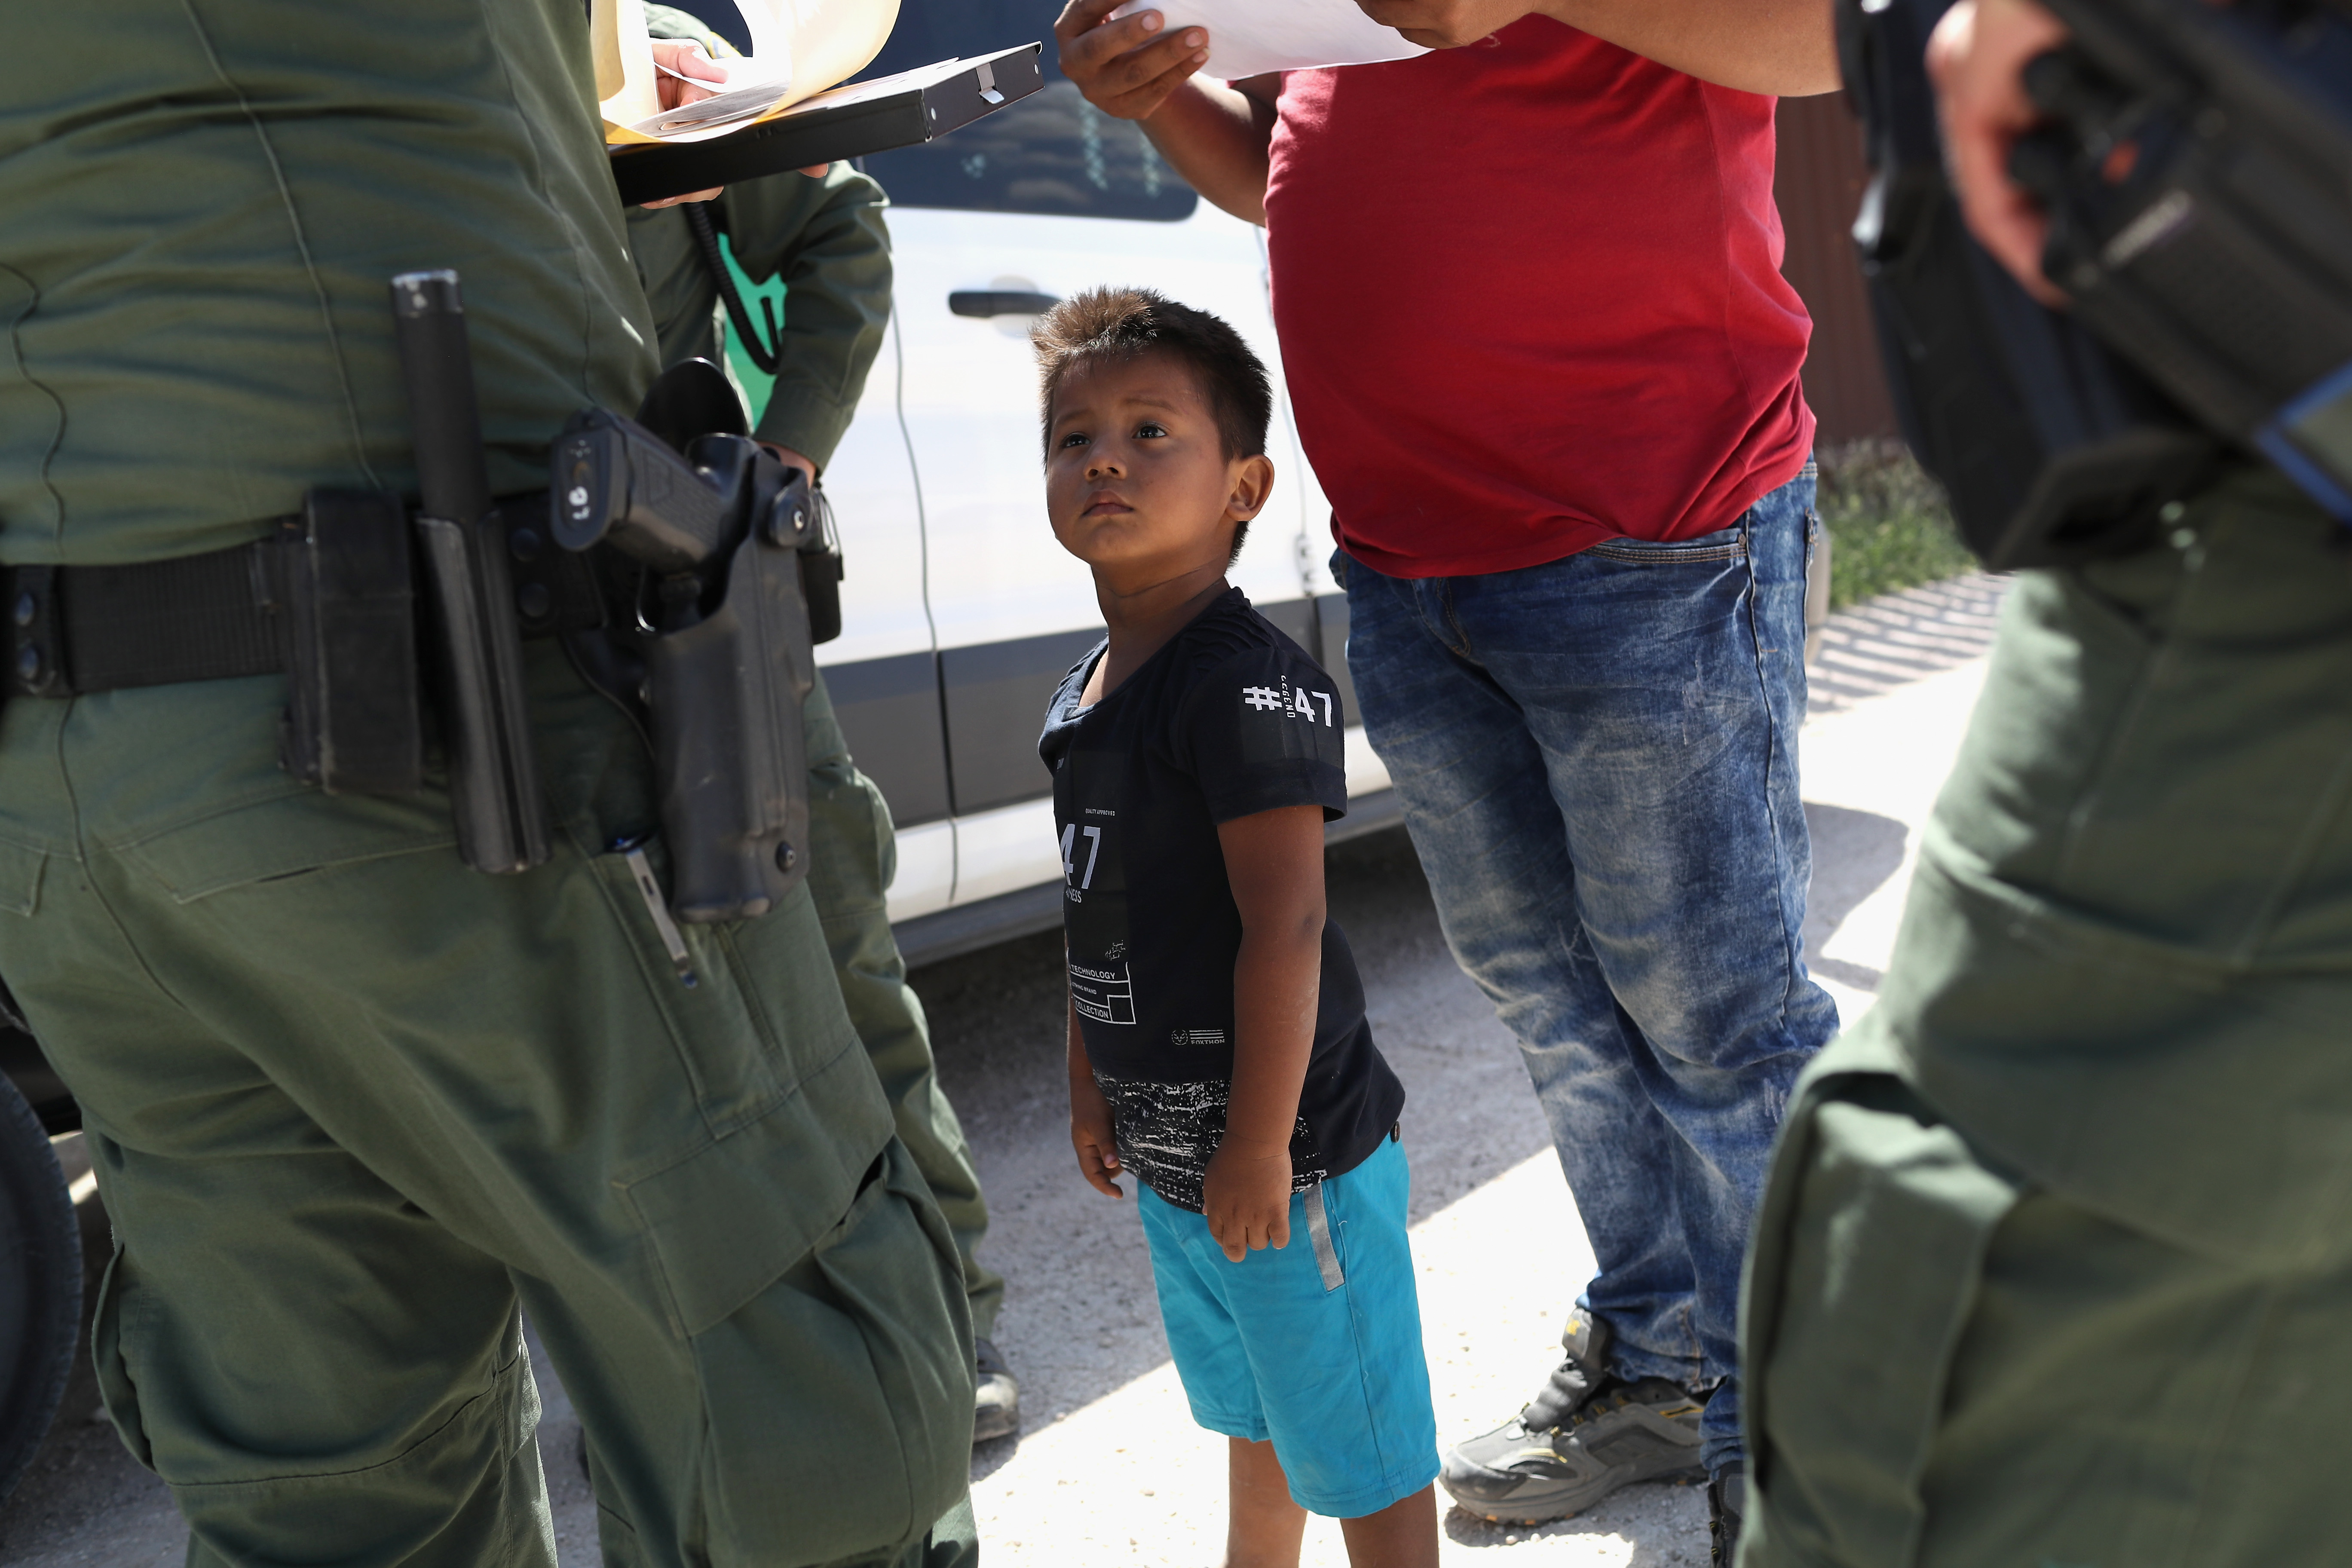 A boy and father from Honduras are taken into custody by U.S. Border Patrol agents near the U.S.-Mexico Border on June 12, 2018 near Mission, Texas.